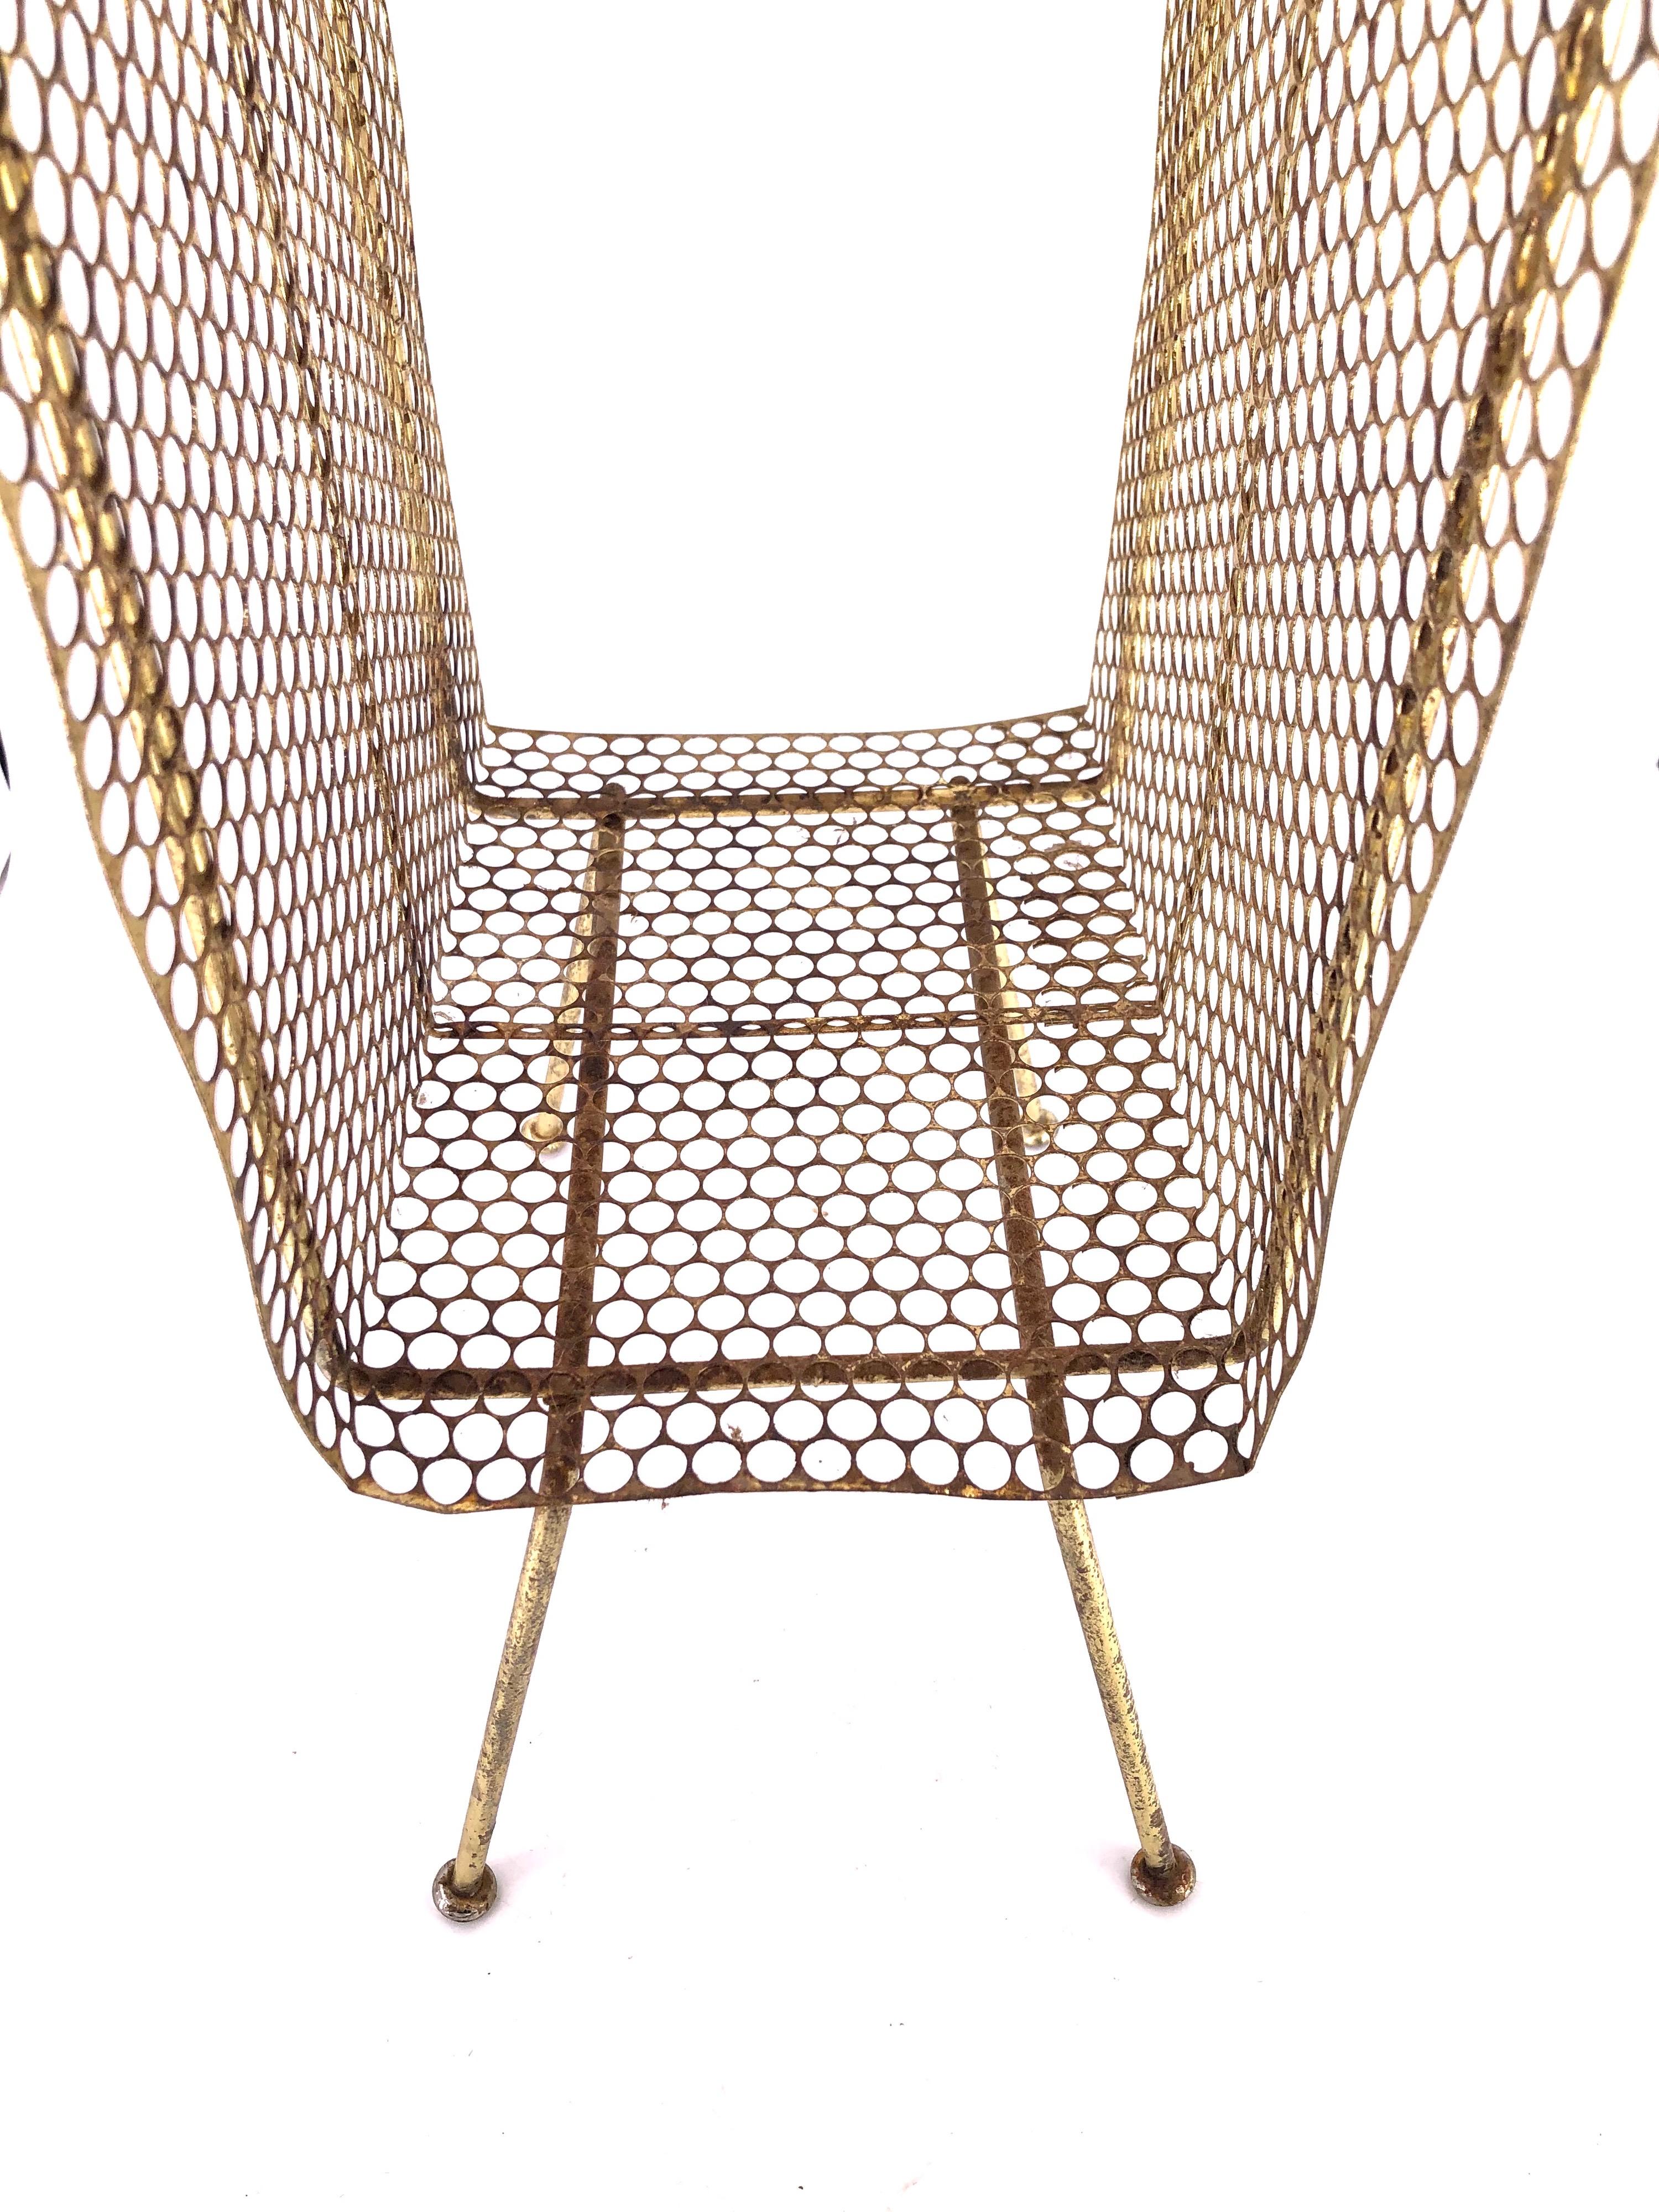 Richard Galef Wire Perforated Metal Stand/ Rack in Brass Finish 2